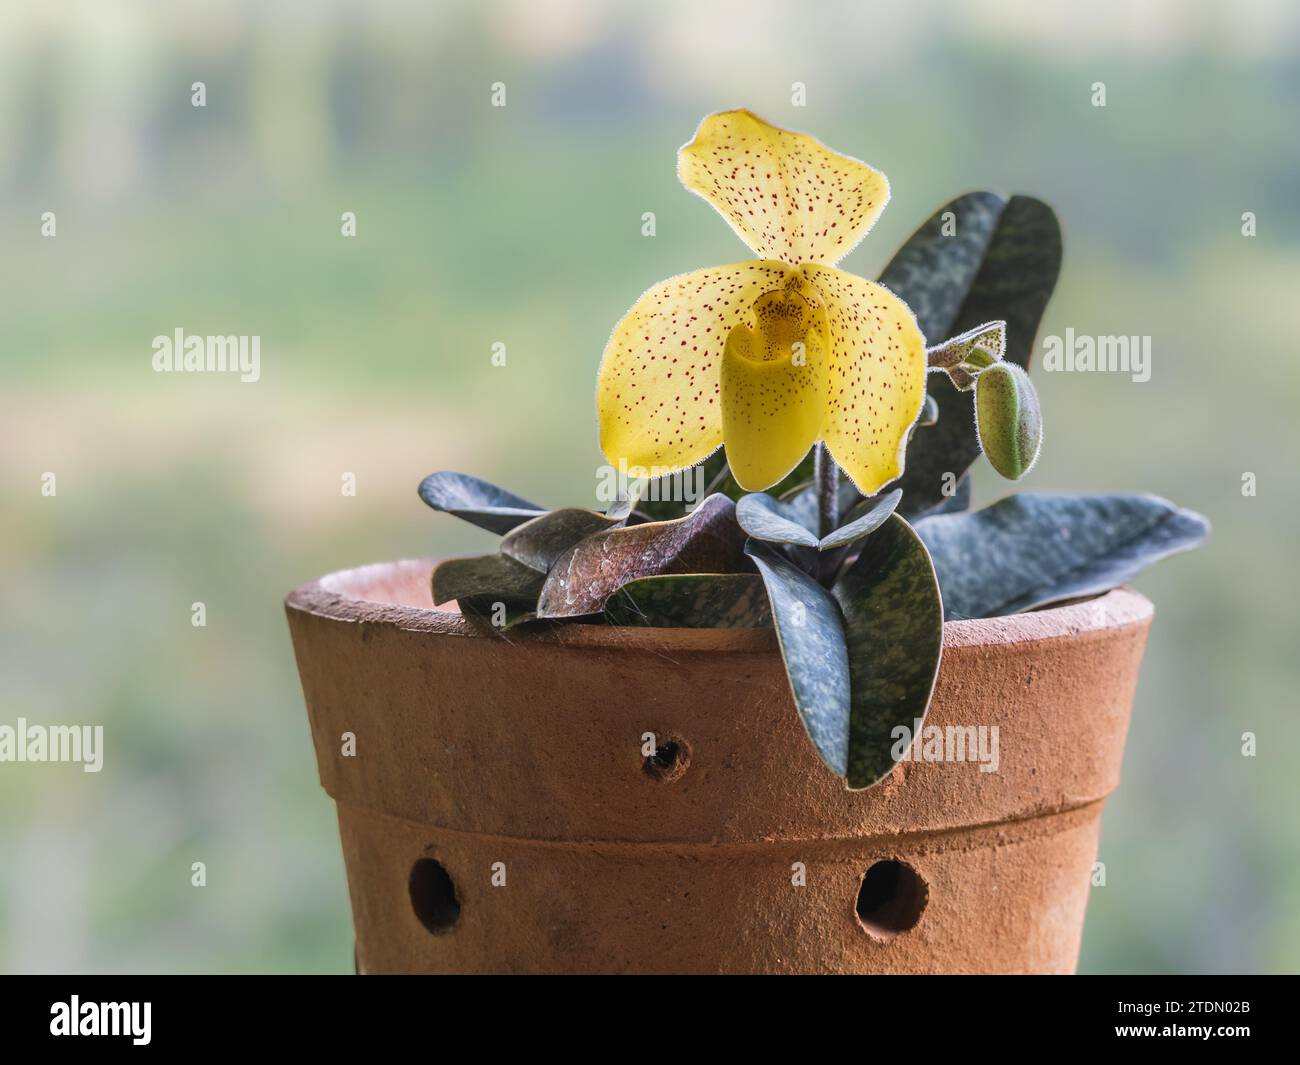 Closeup view of potted lady slipper orchid species paphiopedilum wenshanense aka conco-bellatulum with yellow and red dots flower, isolated outdoors Stock Photo